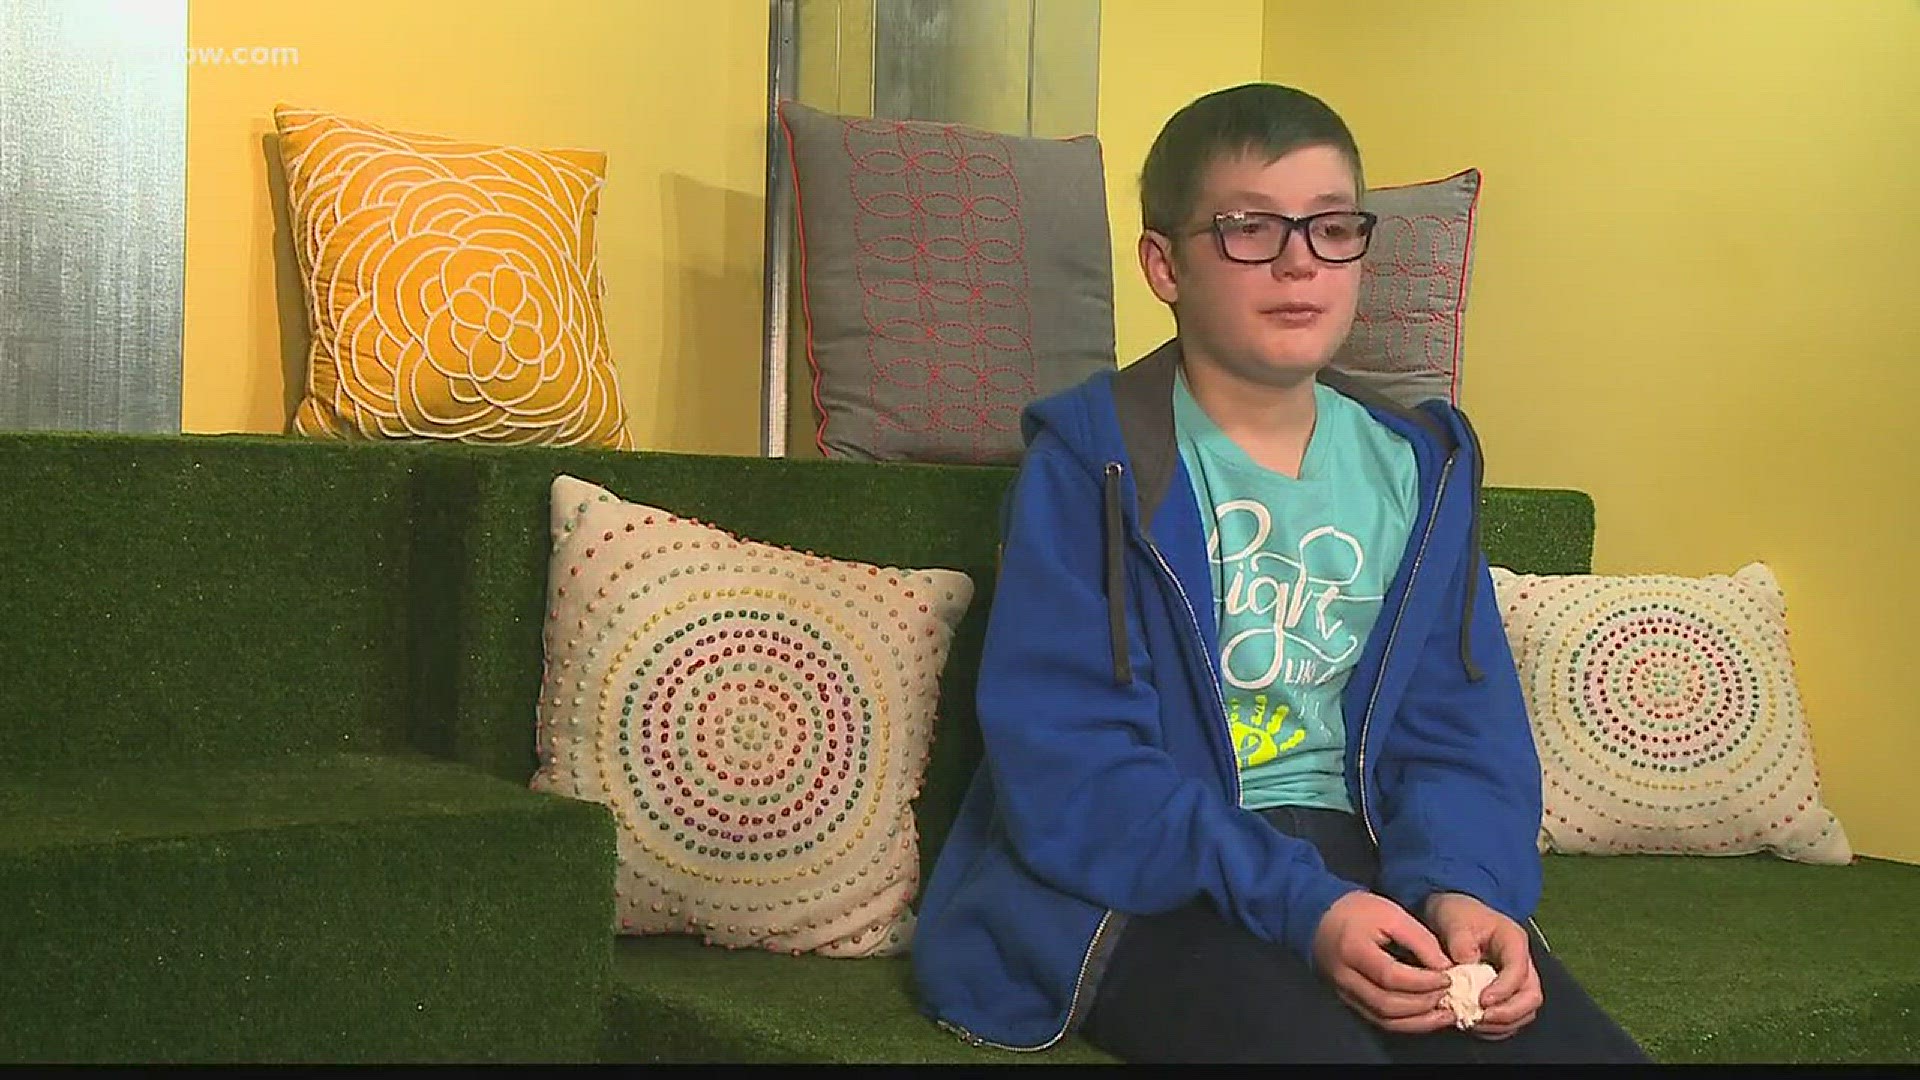 A local 12-year-old is raising money for the Saint Baldrick's Foundation. The non-profit helps raise funds to find a cure for childhood cancer by hosting head-shaving events.